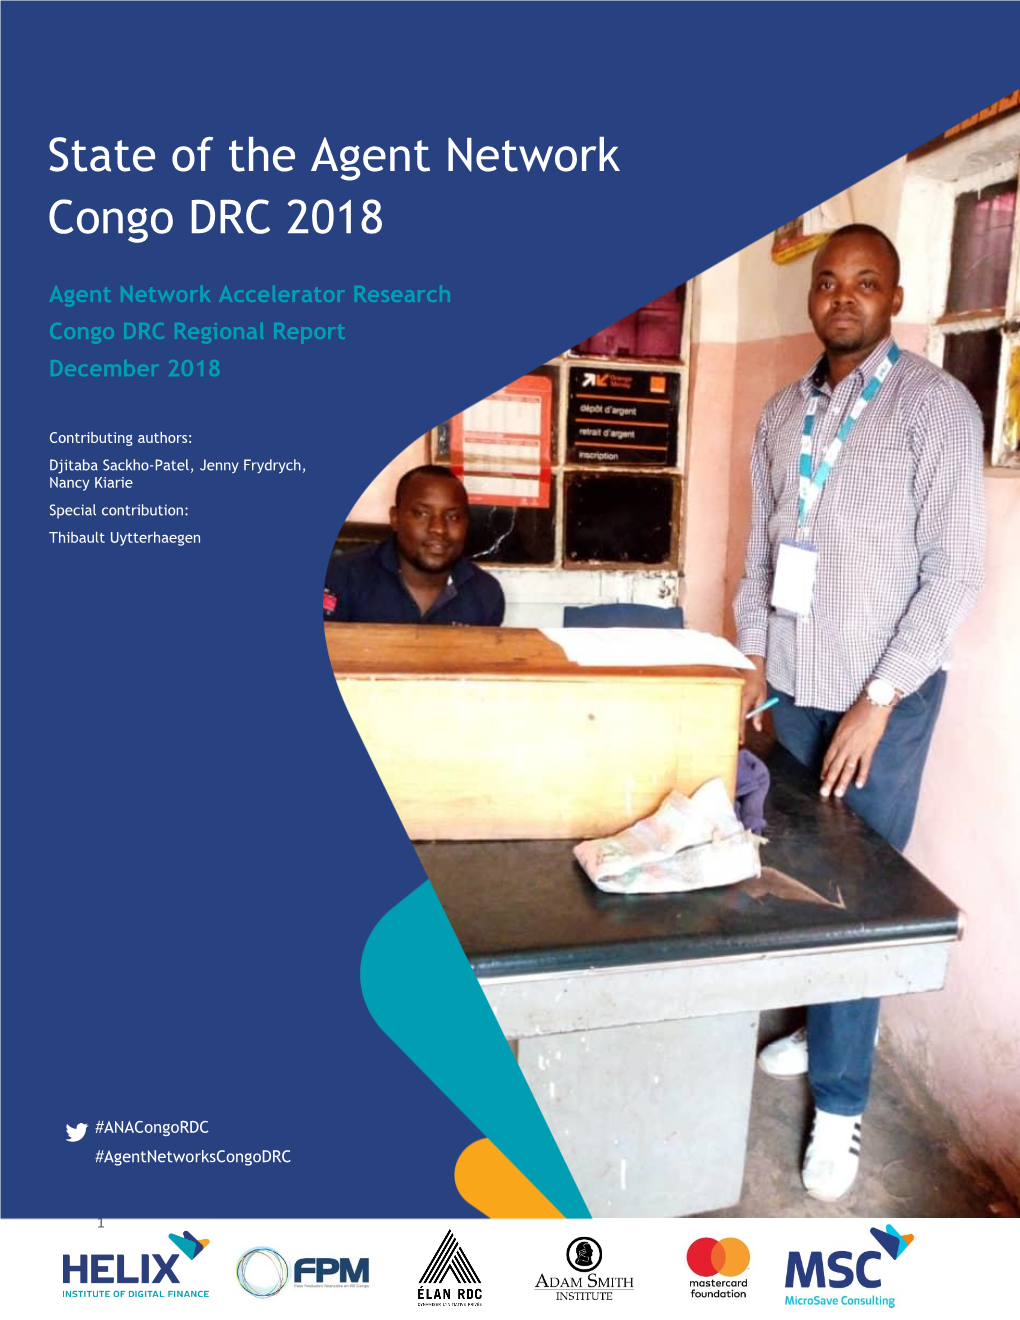 State of the Agent Network Congo DRC 2018